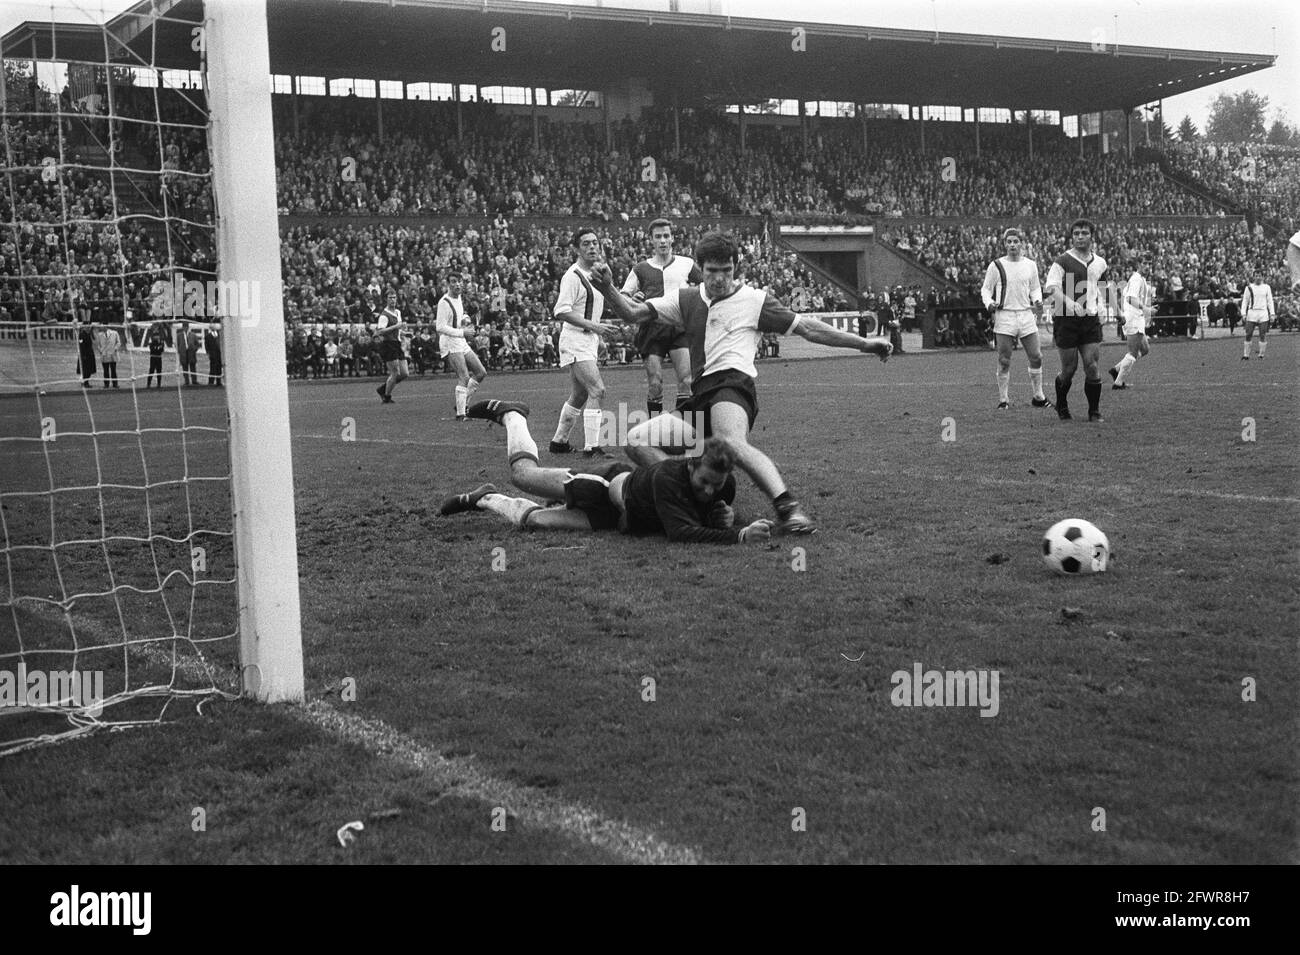 NEC v Feyenoord 0-2. Wim van Hanegem with knee against head of goalkeeper De Bree, Mellaard, Merkx and Kindvall, October 26, 1969, soccer, The Netherlands, 20th century press agency photo, news to remember, documentary, historic photography 1945-1990, visual stories, human history of the Twentieth Century, capturing moments in time Stock Photo